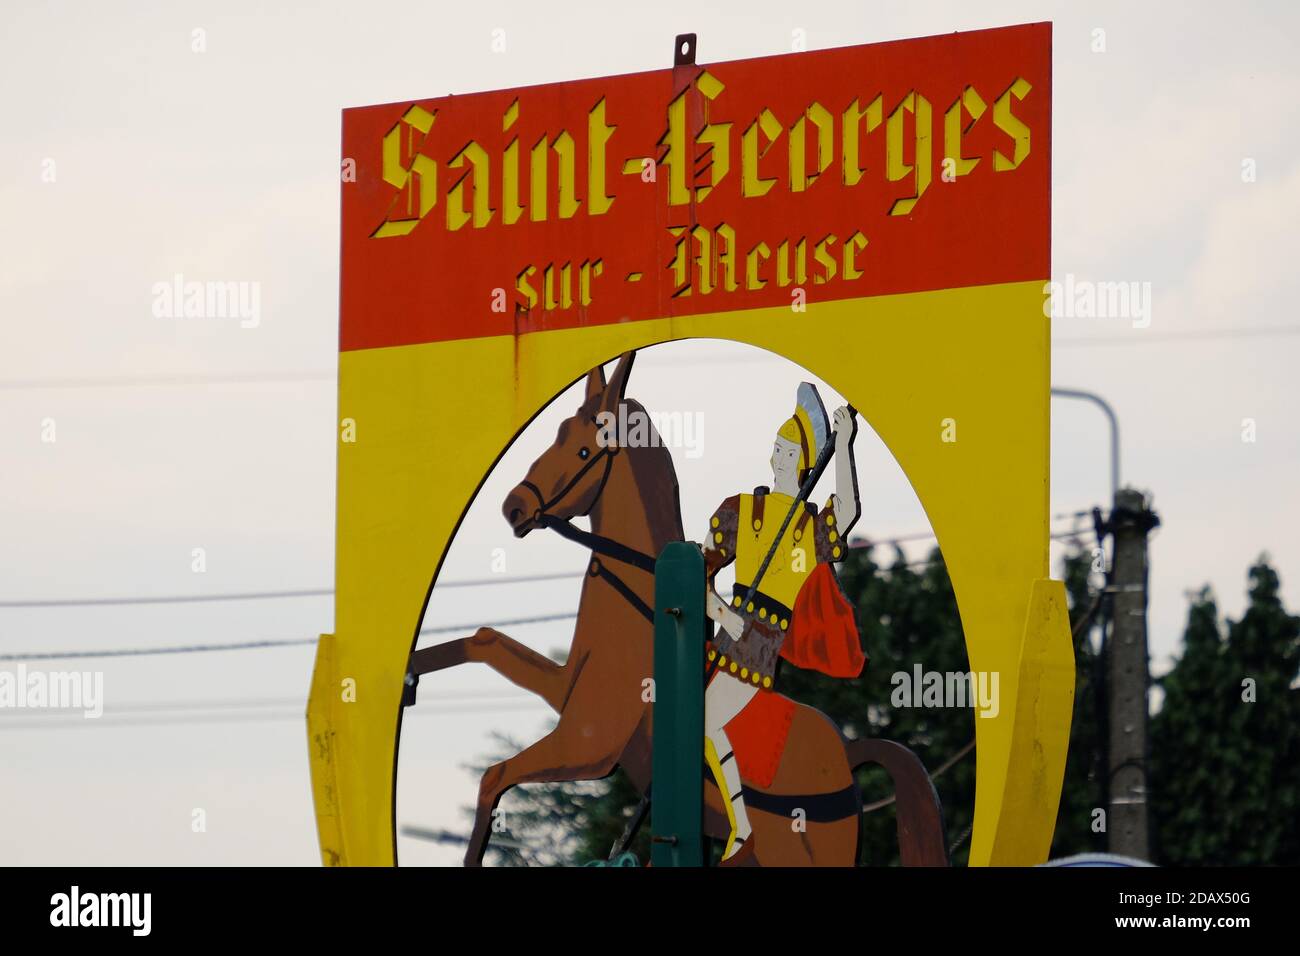 Illustration shows the name of the Saint-Georges-sur-Meuse municipality on a road sign, Wednesday 16 May 2018. BELGA PHOTO BRUNO FAHY Stock Photo